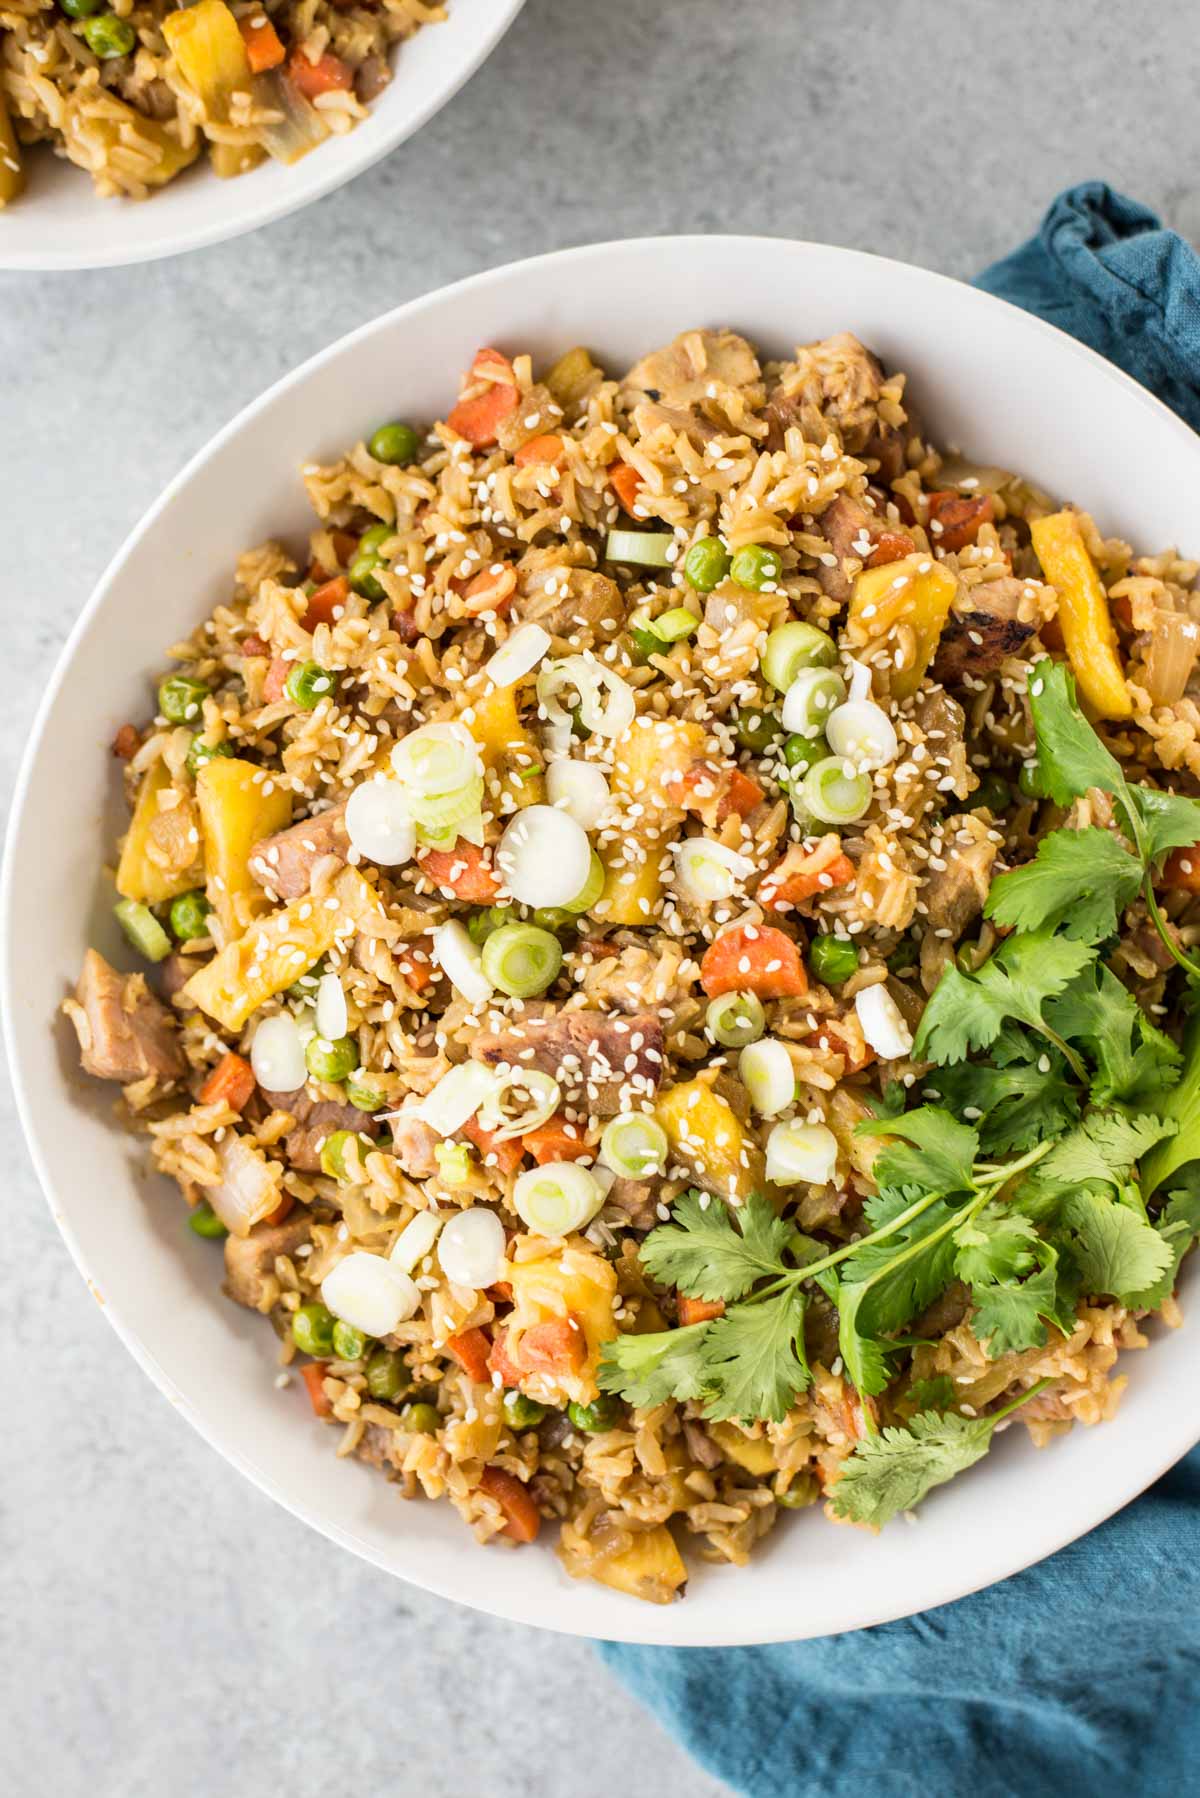 This 20 minute easy fried rice combines the natural sweetness of pineapple with the juices of ham to make a delicious take on fried rice.